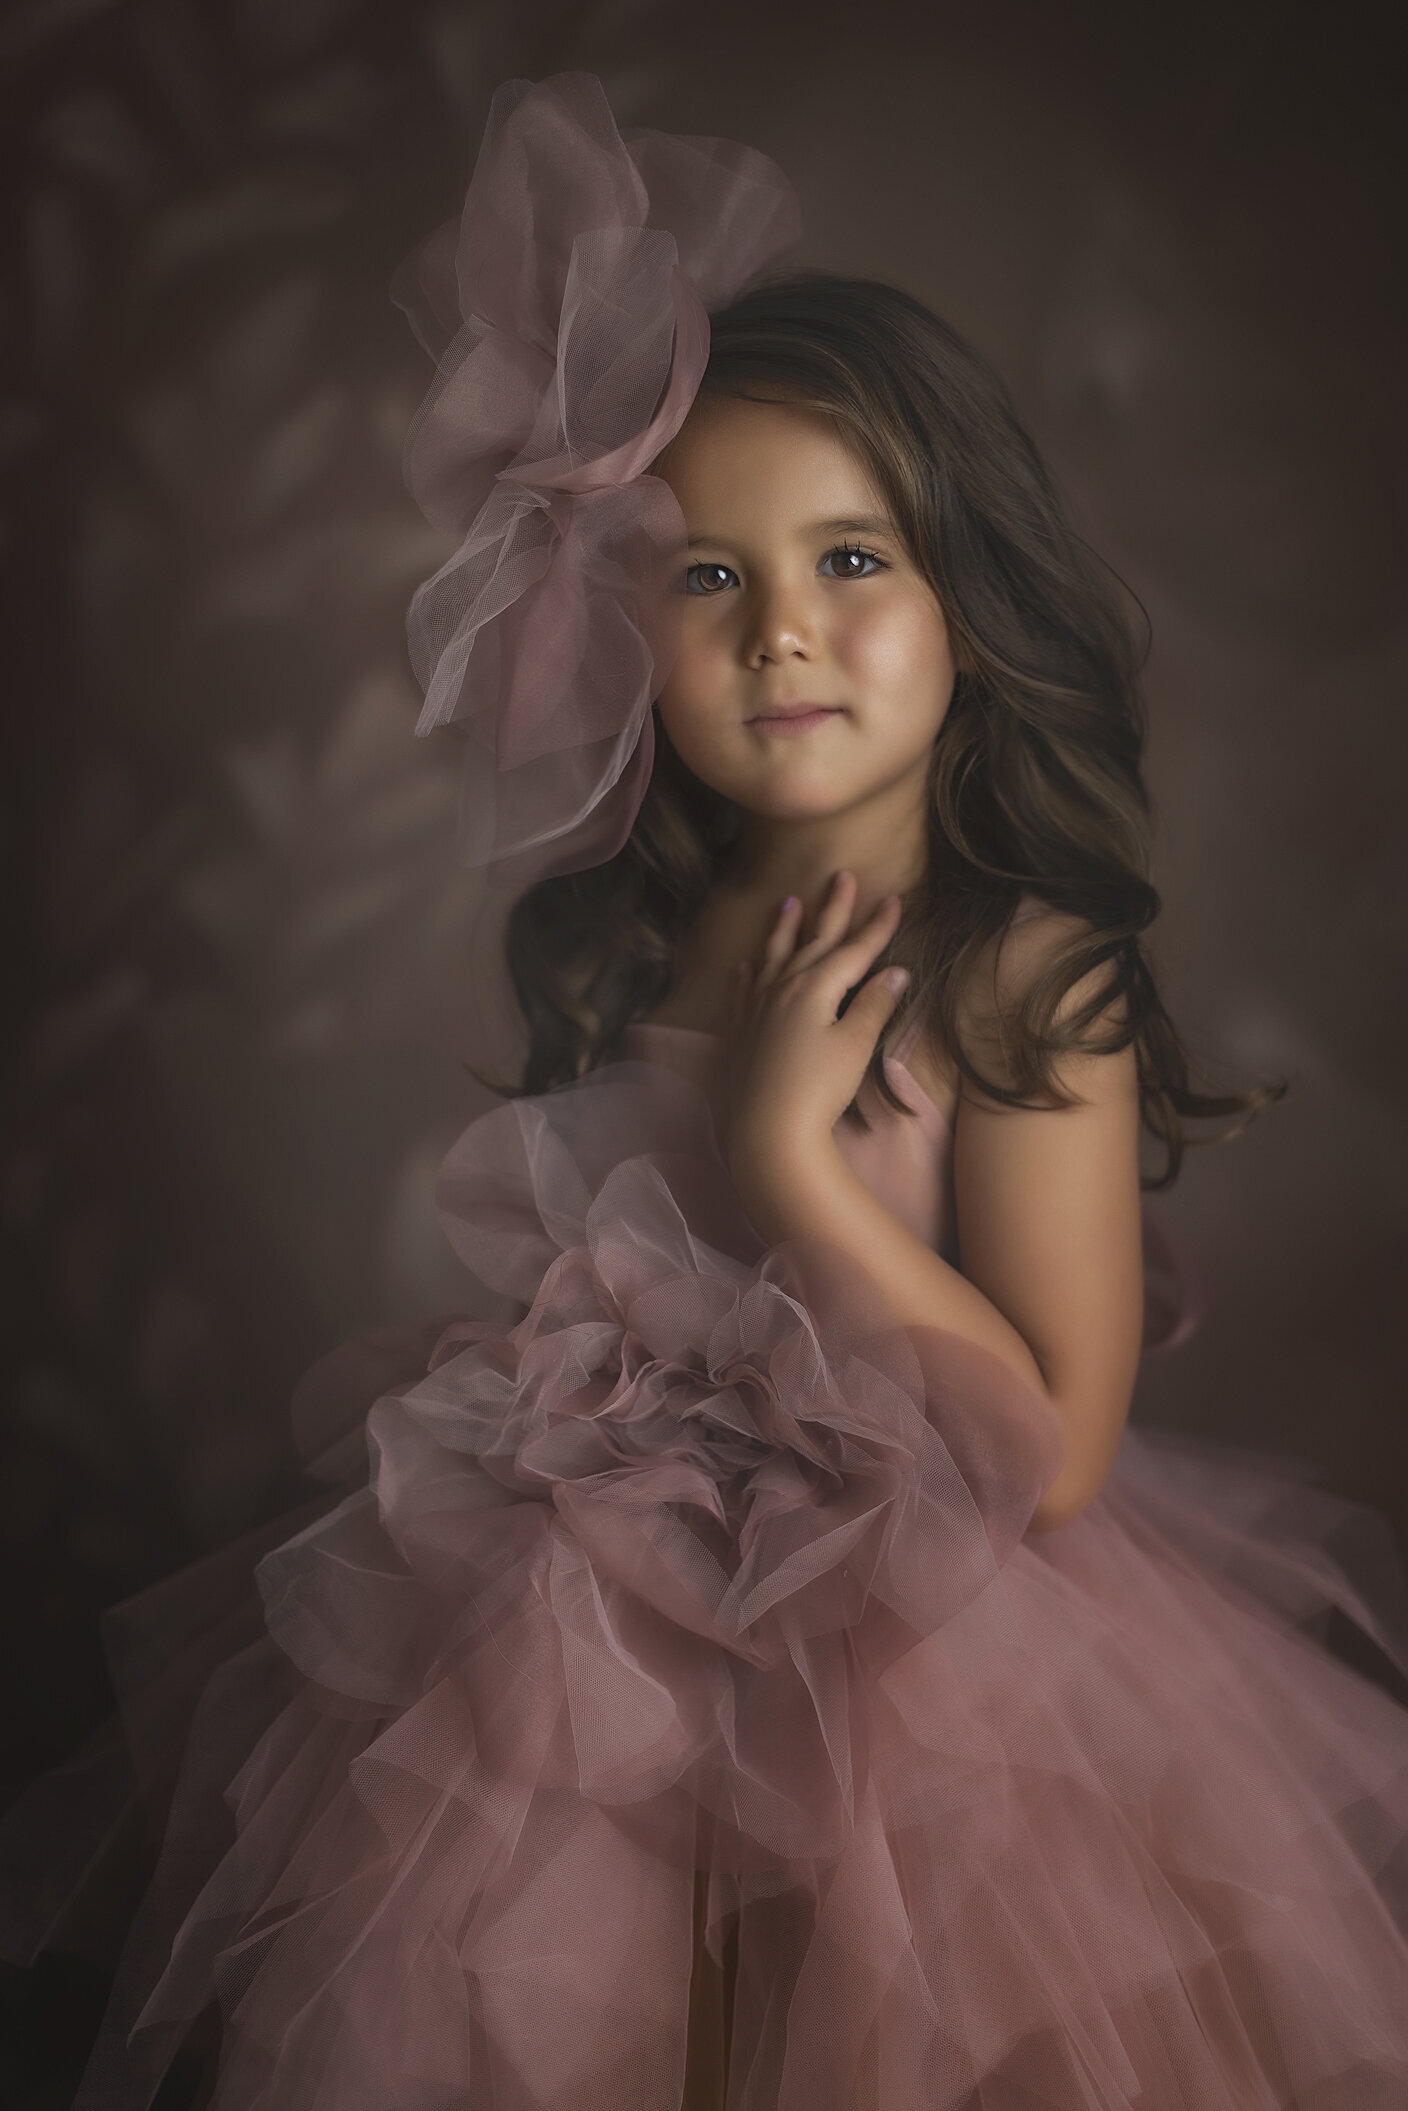 Young girl in Fine Art photograph by Dahlias and Daisies Photography.